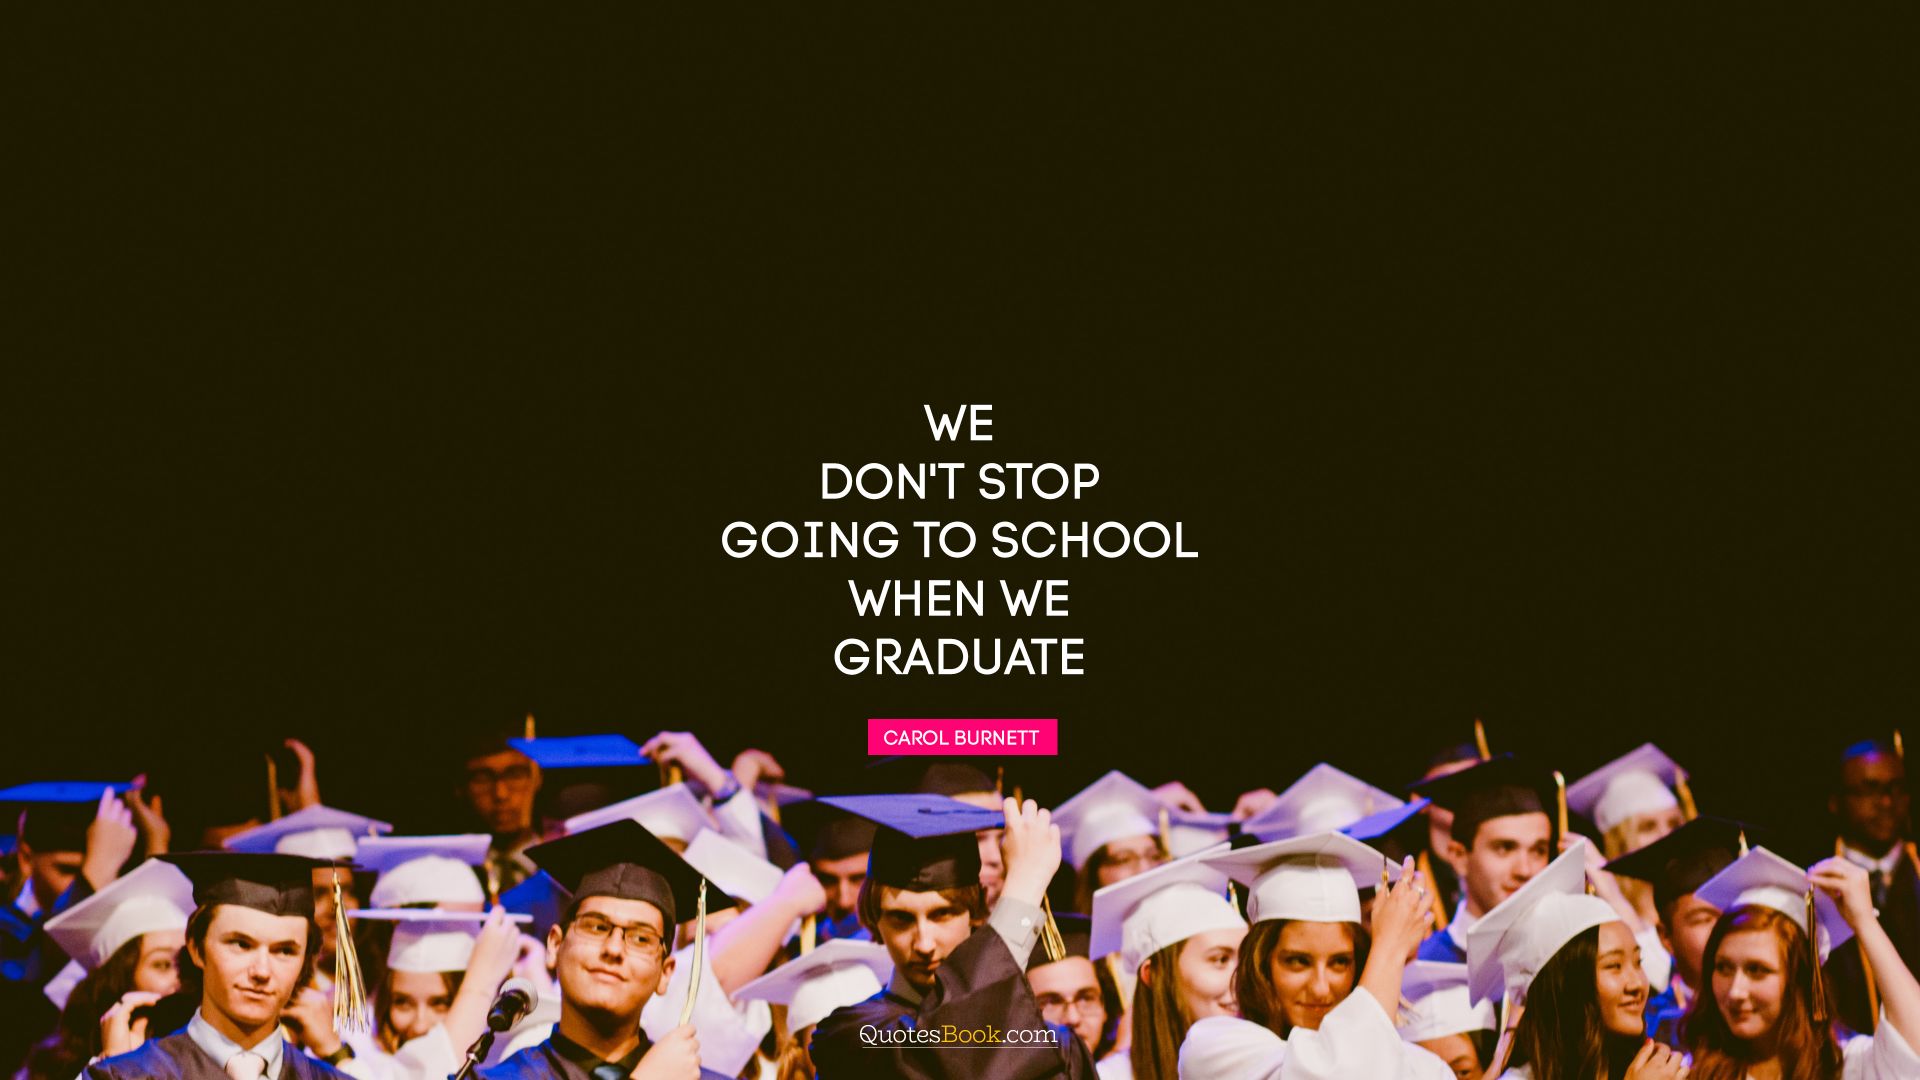 We don't stop going to school when we graduate. - Quote by Carol Burnett